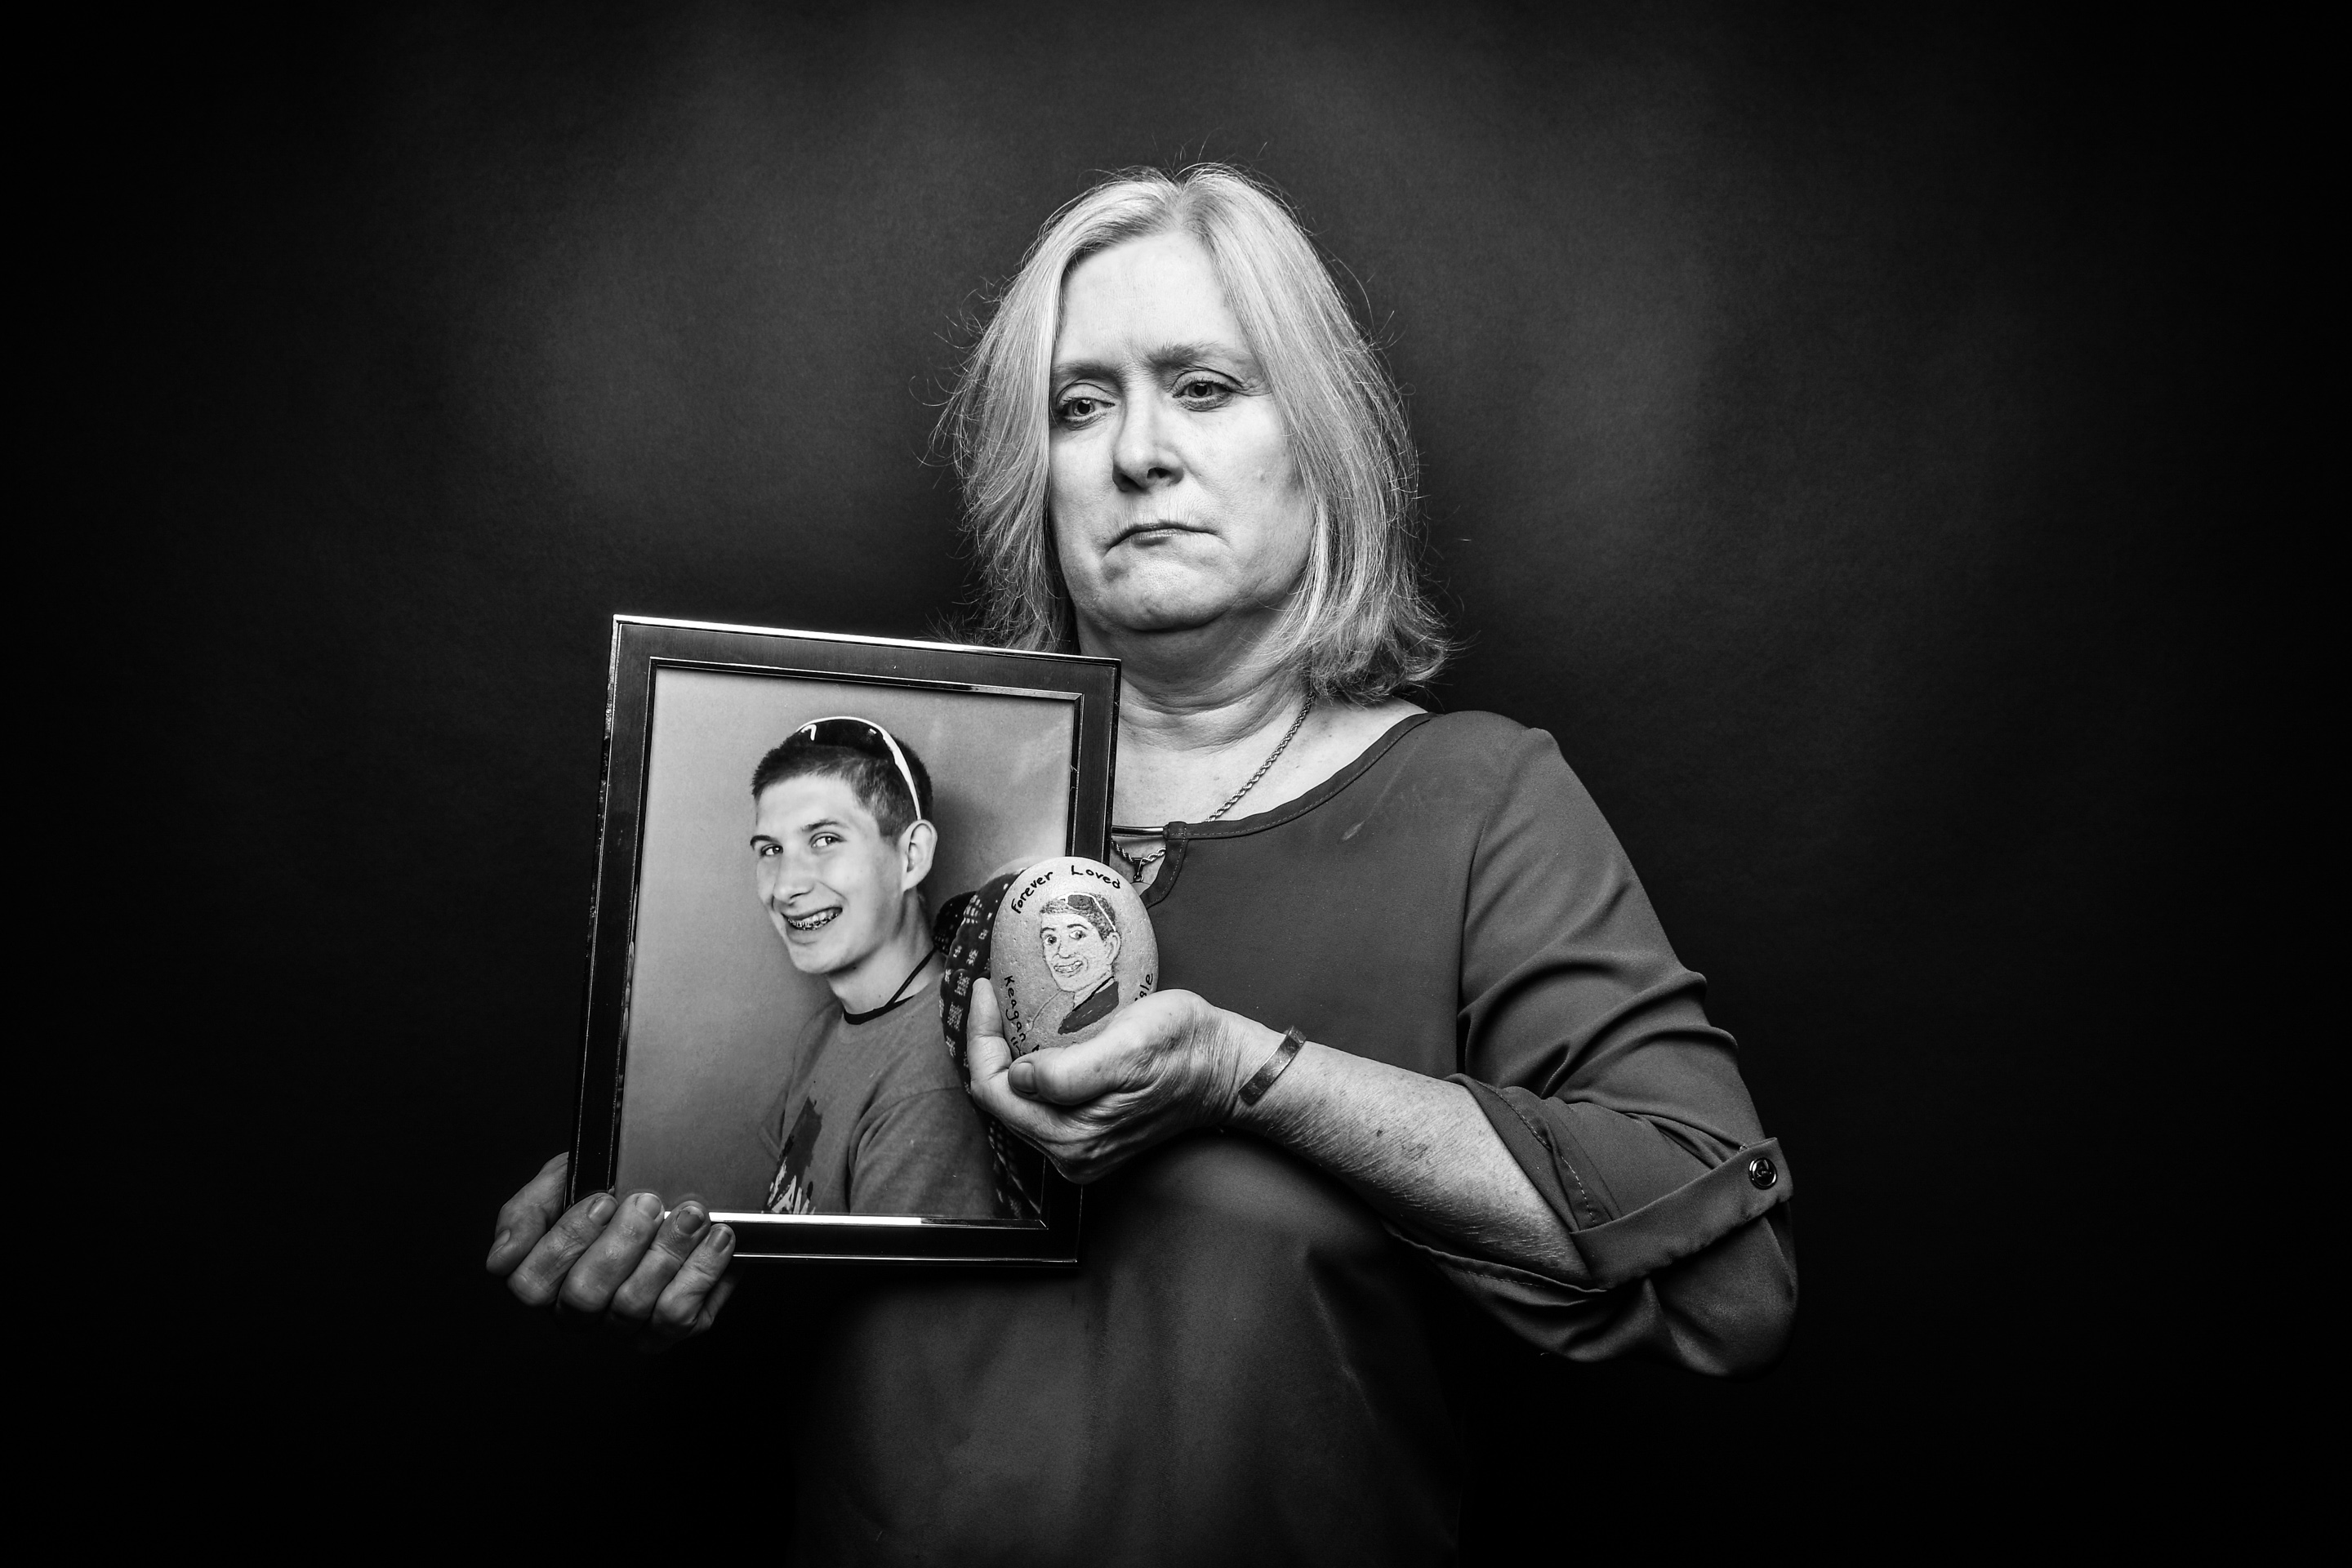 Kim Belle Isle, Davenport, holds a photo of her son Keagan and a rock she painted in his memory. Keagan died by suicide at 17, in 2017.